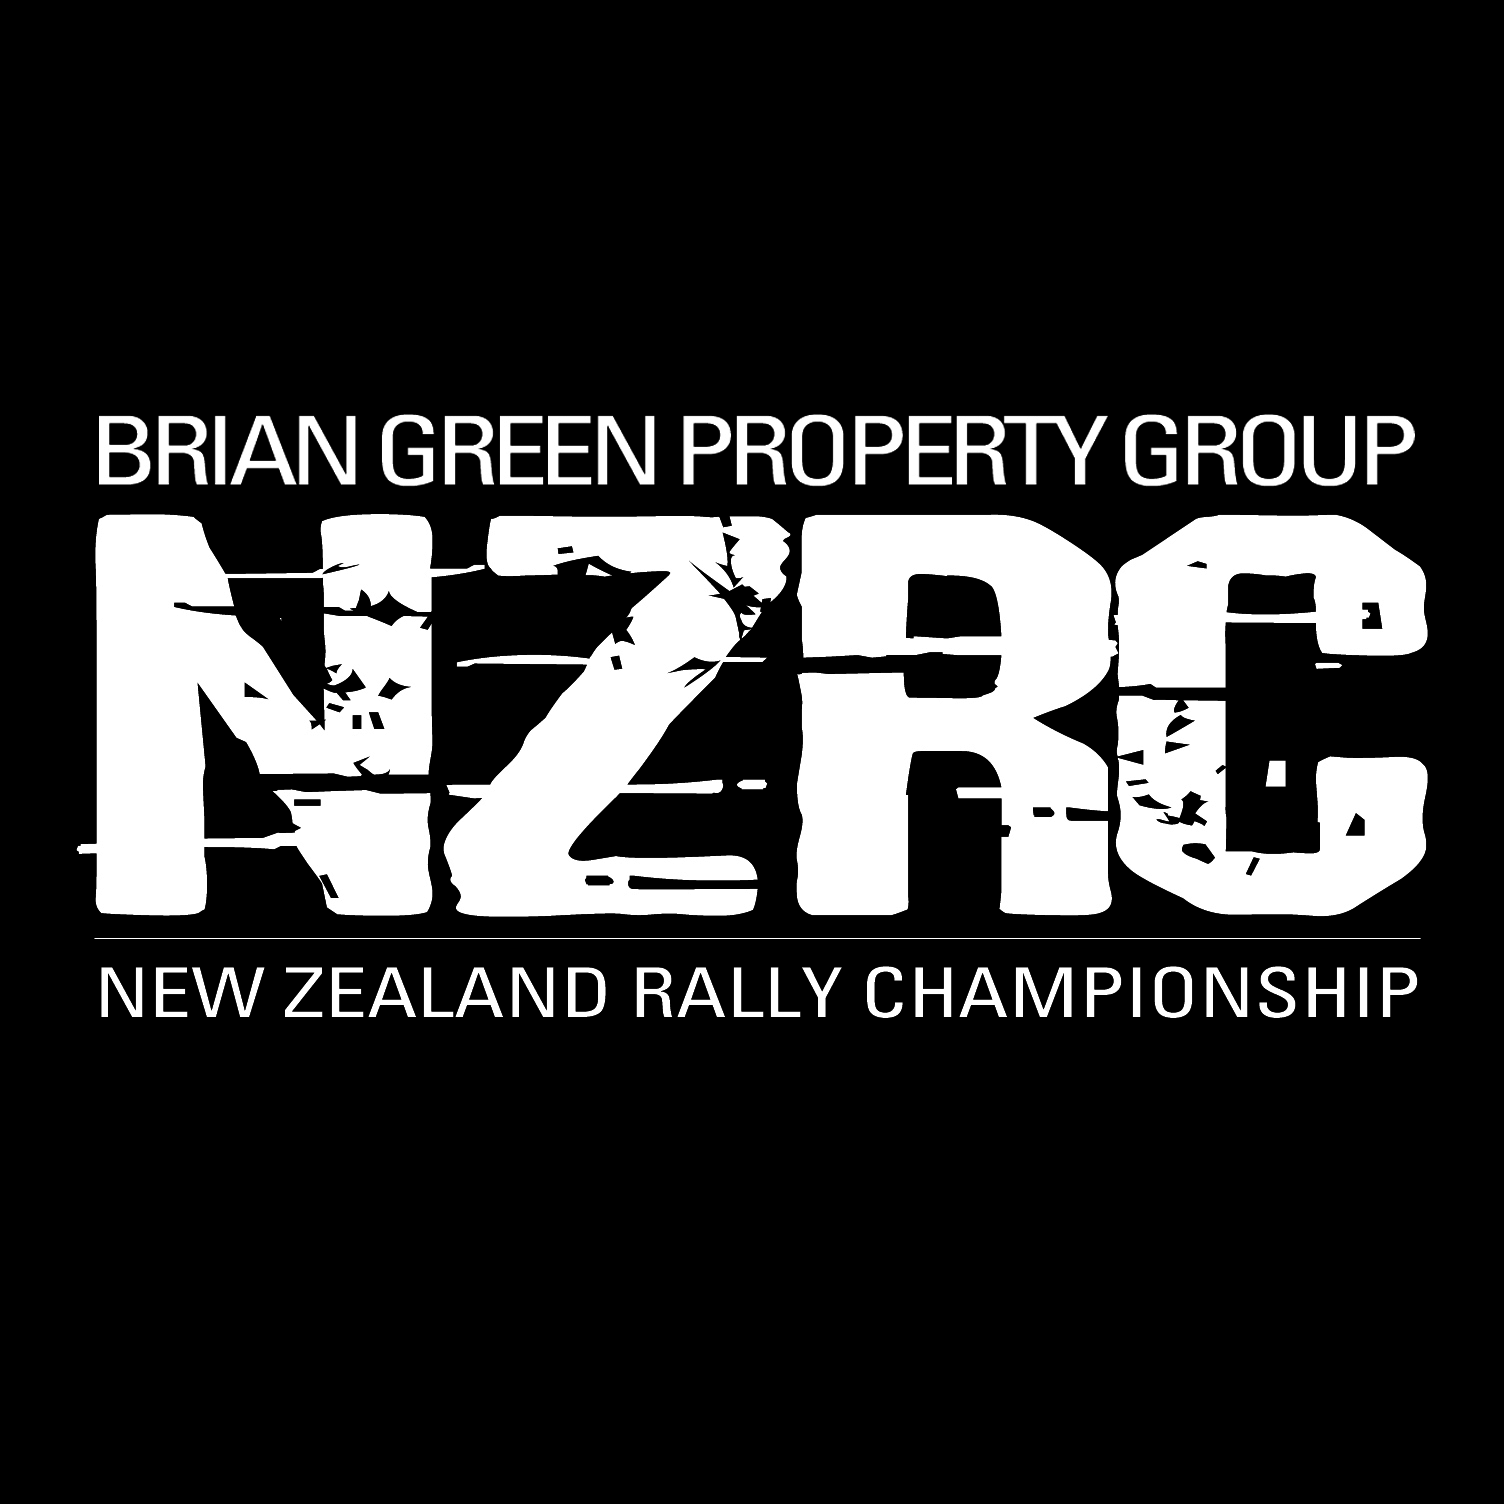 Women competitors make up 40 percent at Otago | :: Brian Green Property Group New Zealand Rally Championship ::